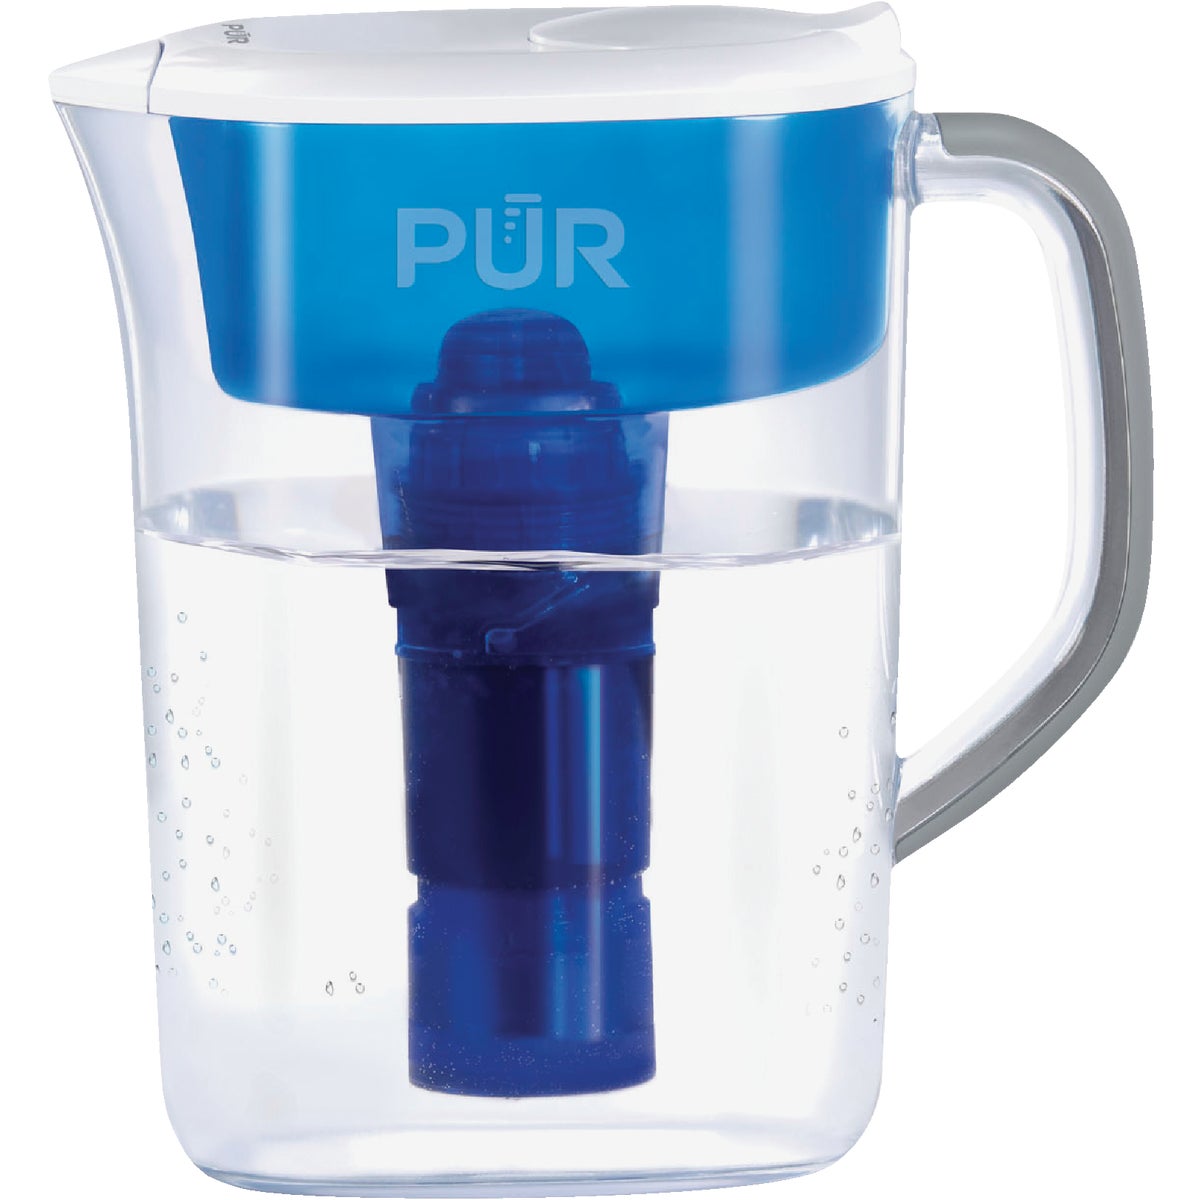 Pur 7-Cup Water Filter Pitcher, Blue